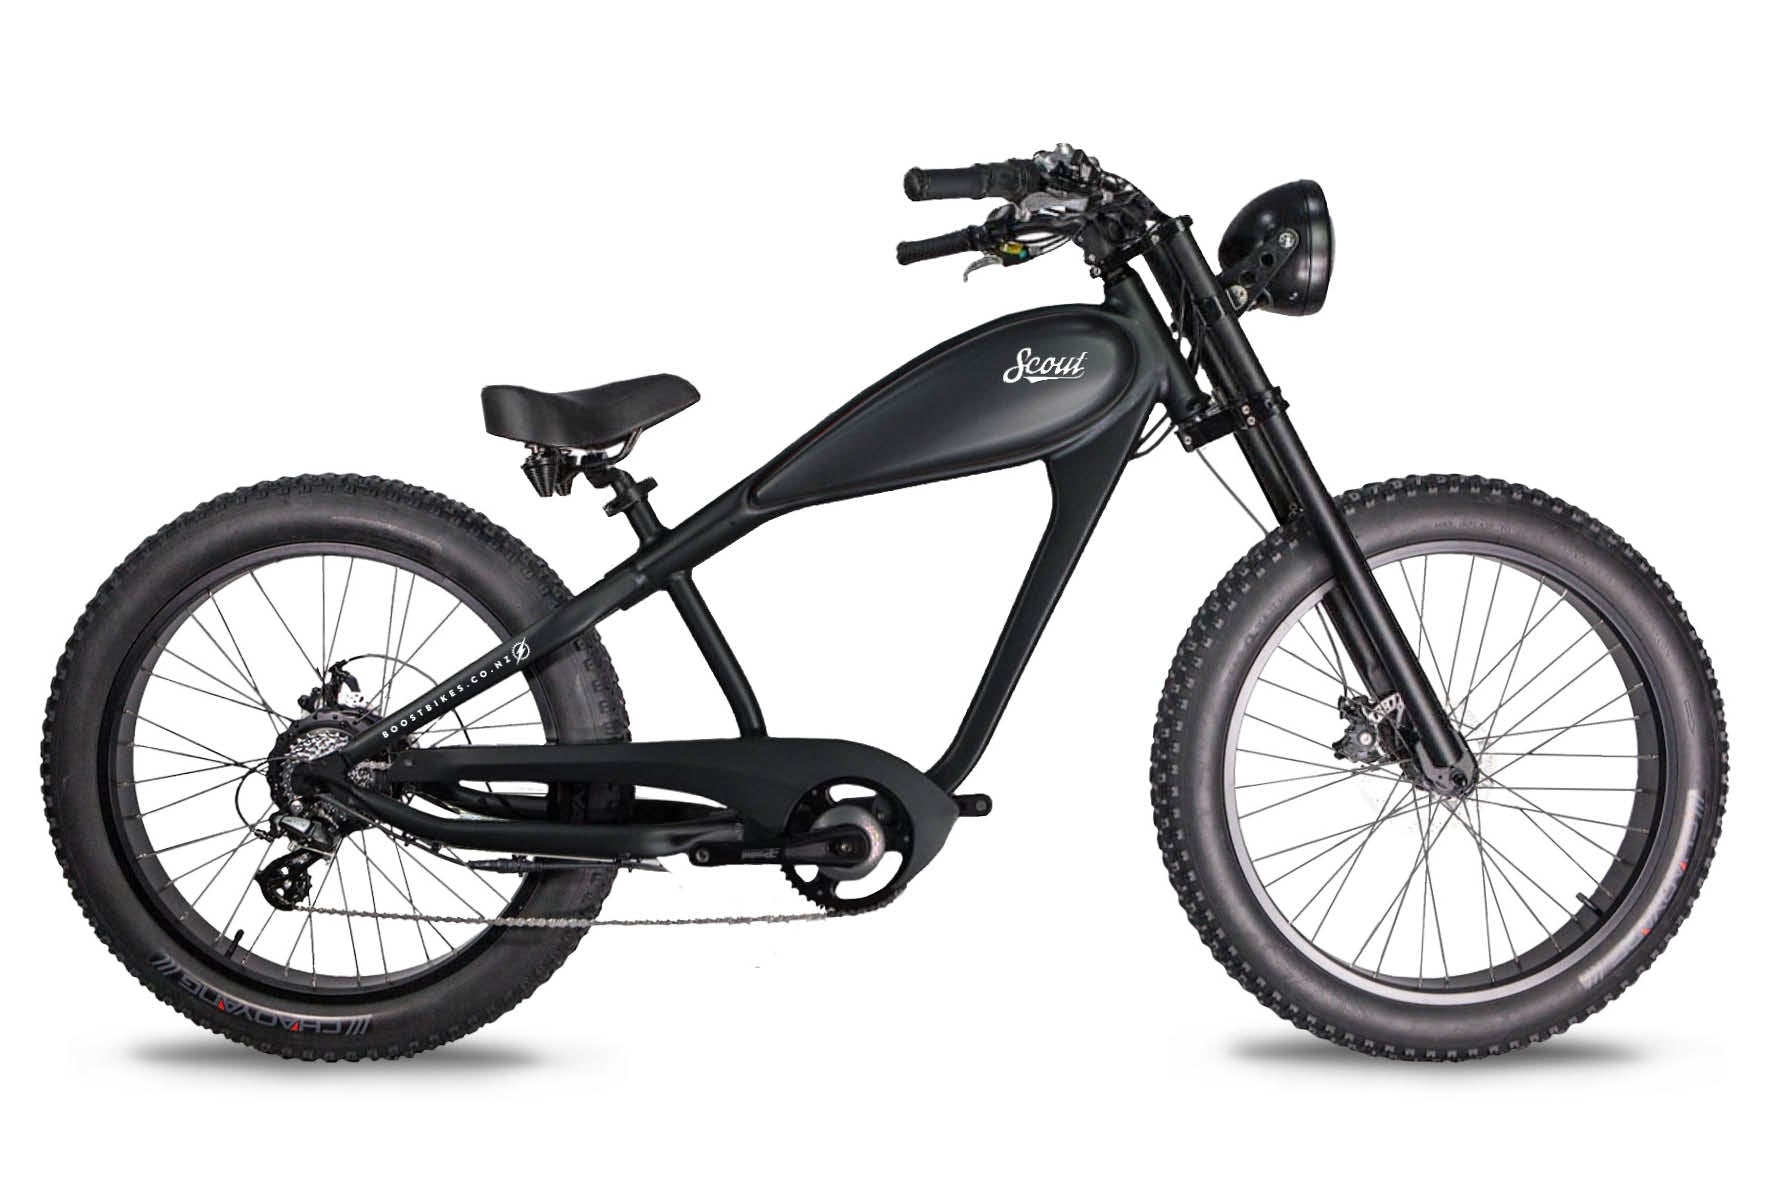 Retro Classic Electric Motorcycle Cruiser bikes from Boostbikes. The MOST COMFORTABLE Cruiser you will ever ride.